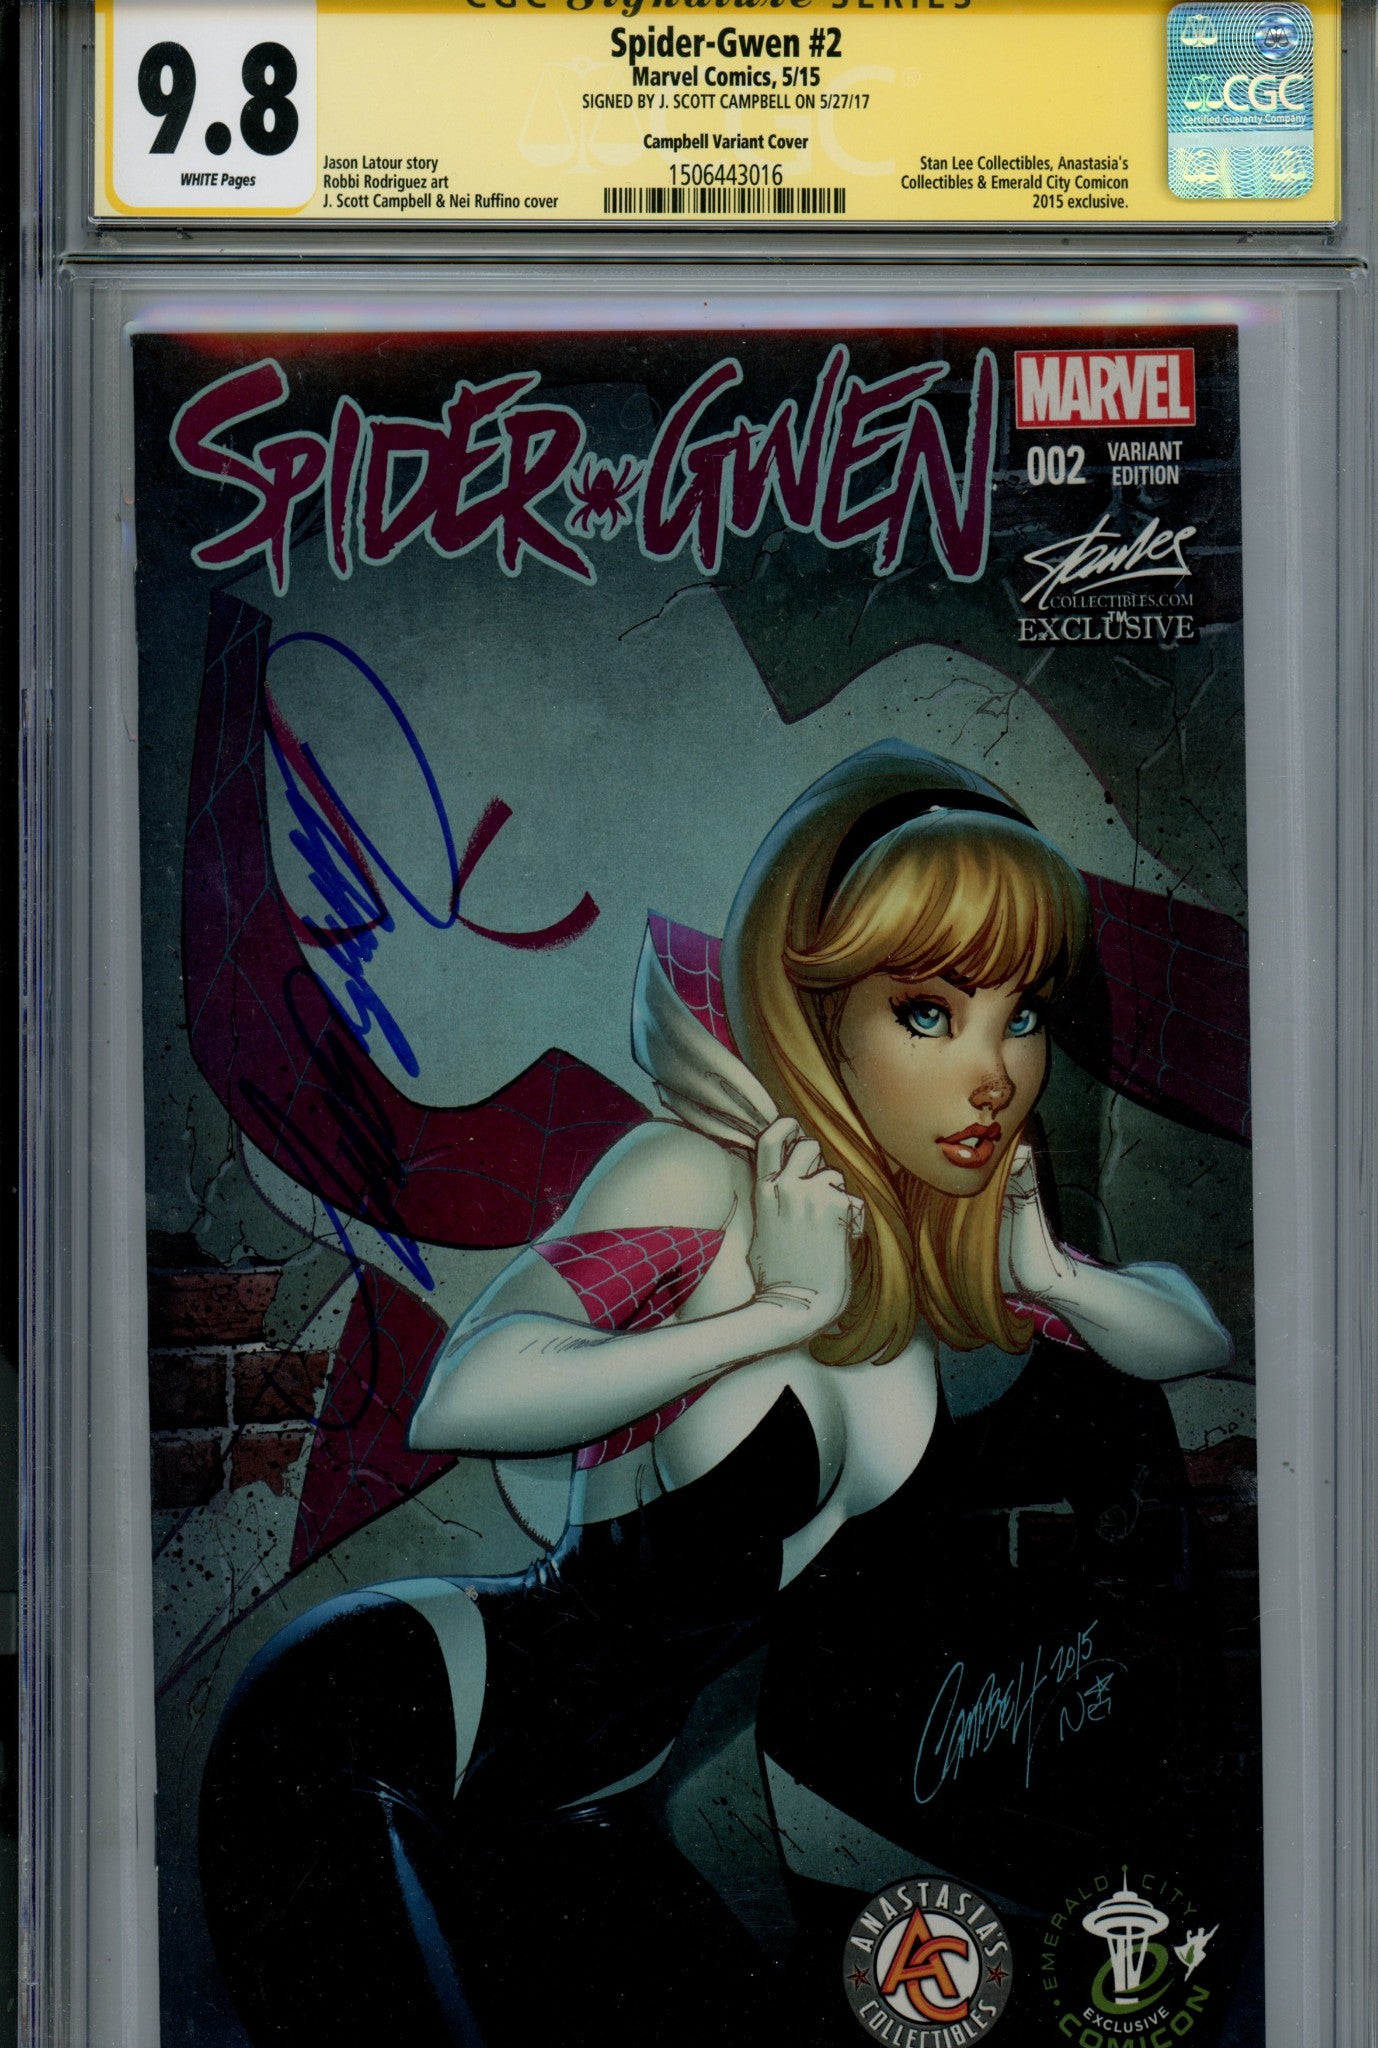 Spider-Gwen Vol 1 2 Campbell Exclusive Variant CGC 9.8 Signed J Scott Campbell (2015)